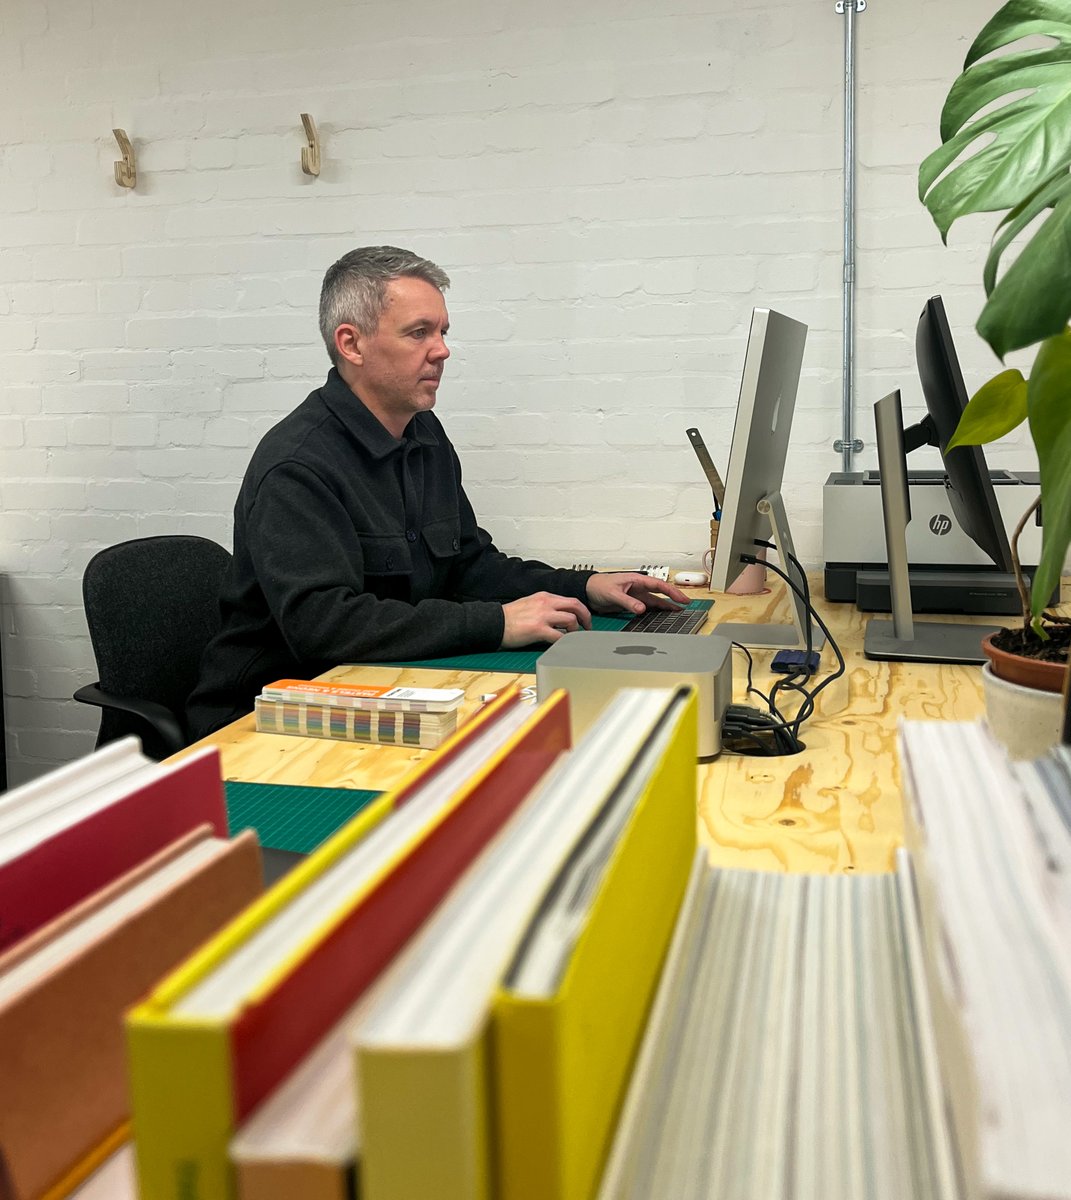 Meet our tenants🙋🏻

📍Shaun from @brandandglory is a Freelance Graphic Designer based in Liverpool.

📩Join our co-working space, we have room for a few businesses to be based out of our studios!

#coworkingspace #liverpoolbusiness